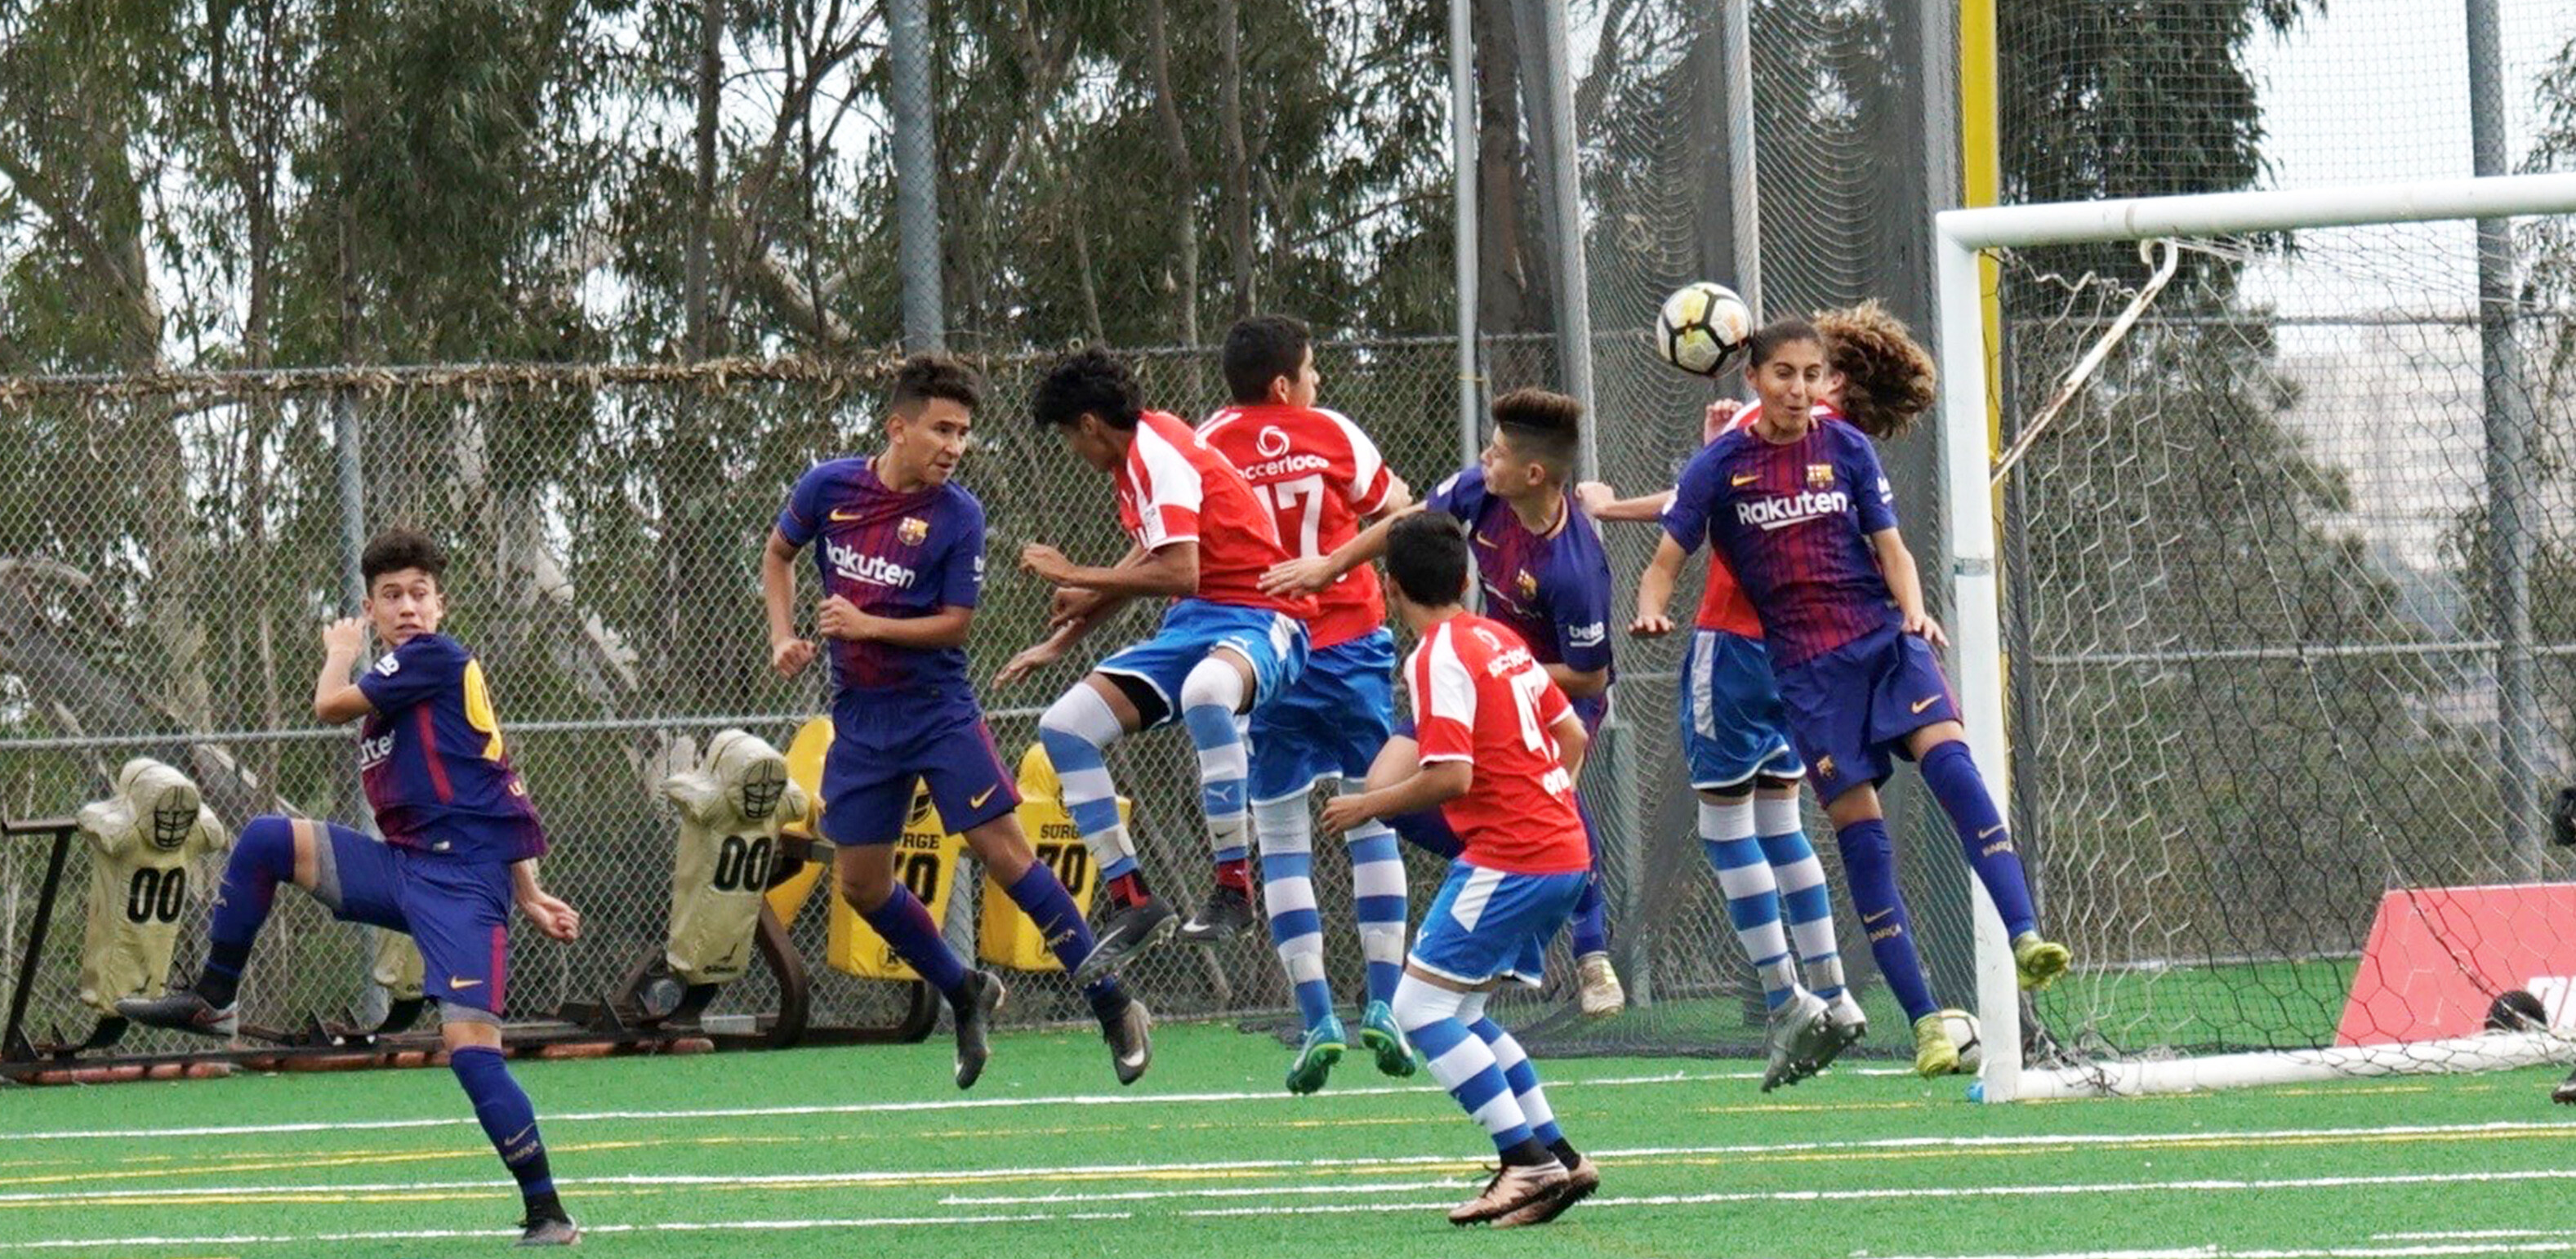 Barça Academy Plays Great at Albion Despite Mixed Results